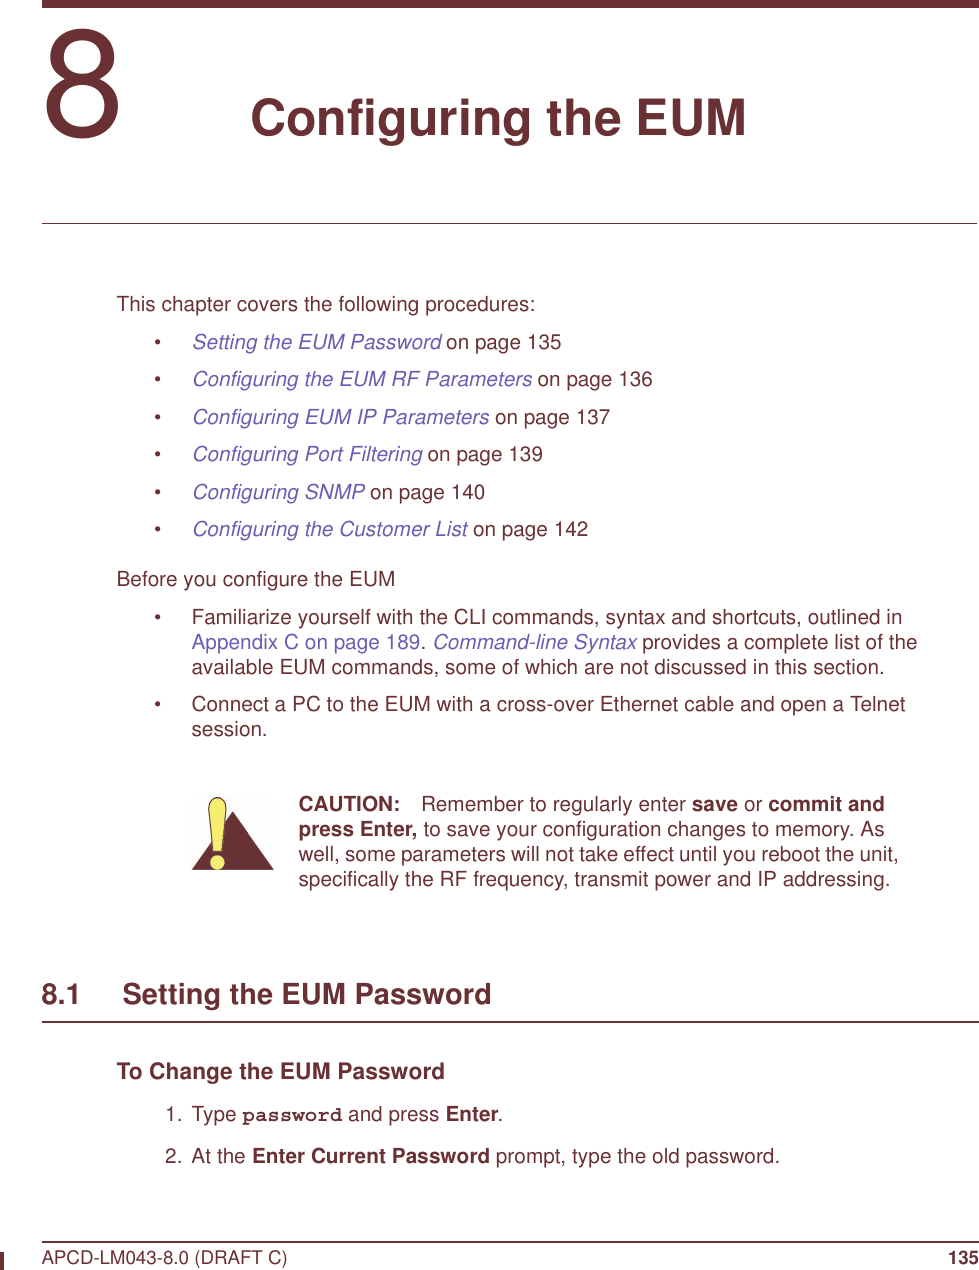 APCD-LM043-8.0 (DRAFT C) 1358   Configuring the EUMThis chapter covers the following procedures:•Setting the EUM Password on page 135•Configuring the EUM RF Parameters on page 136•Configuring EUM IP Parameters on page 137•Configuring Port Filtering on page 139•Configuring SNMP on page 140•Configuring the Customer List on page 142Before you configure the EUM• Familiarize yourself with the CLI commands, syntax and shortcuts, outlined in Appendix C on page 189. Command-line Syntax provides a complete list of the available EUM commands, some of which are not discussed in this section.• Connect a PC to the EUM with a cross-over Ethernet cable and open a Telnet session. CAUTION: Remember to regularly enter save or commit and press Enter, to save your configuration changes to memory. As well, some parameters will not take effect until you reboot the unit, specifically the RF frequency, transmit power and IP addressing.8.1     Setting the EUM PasswordTo Change the EUM Password 1. Type password and press Enter. 2. At the Enter Current Password prompt, type the old password. 